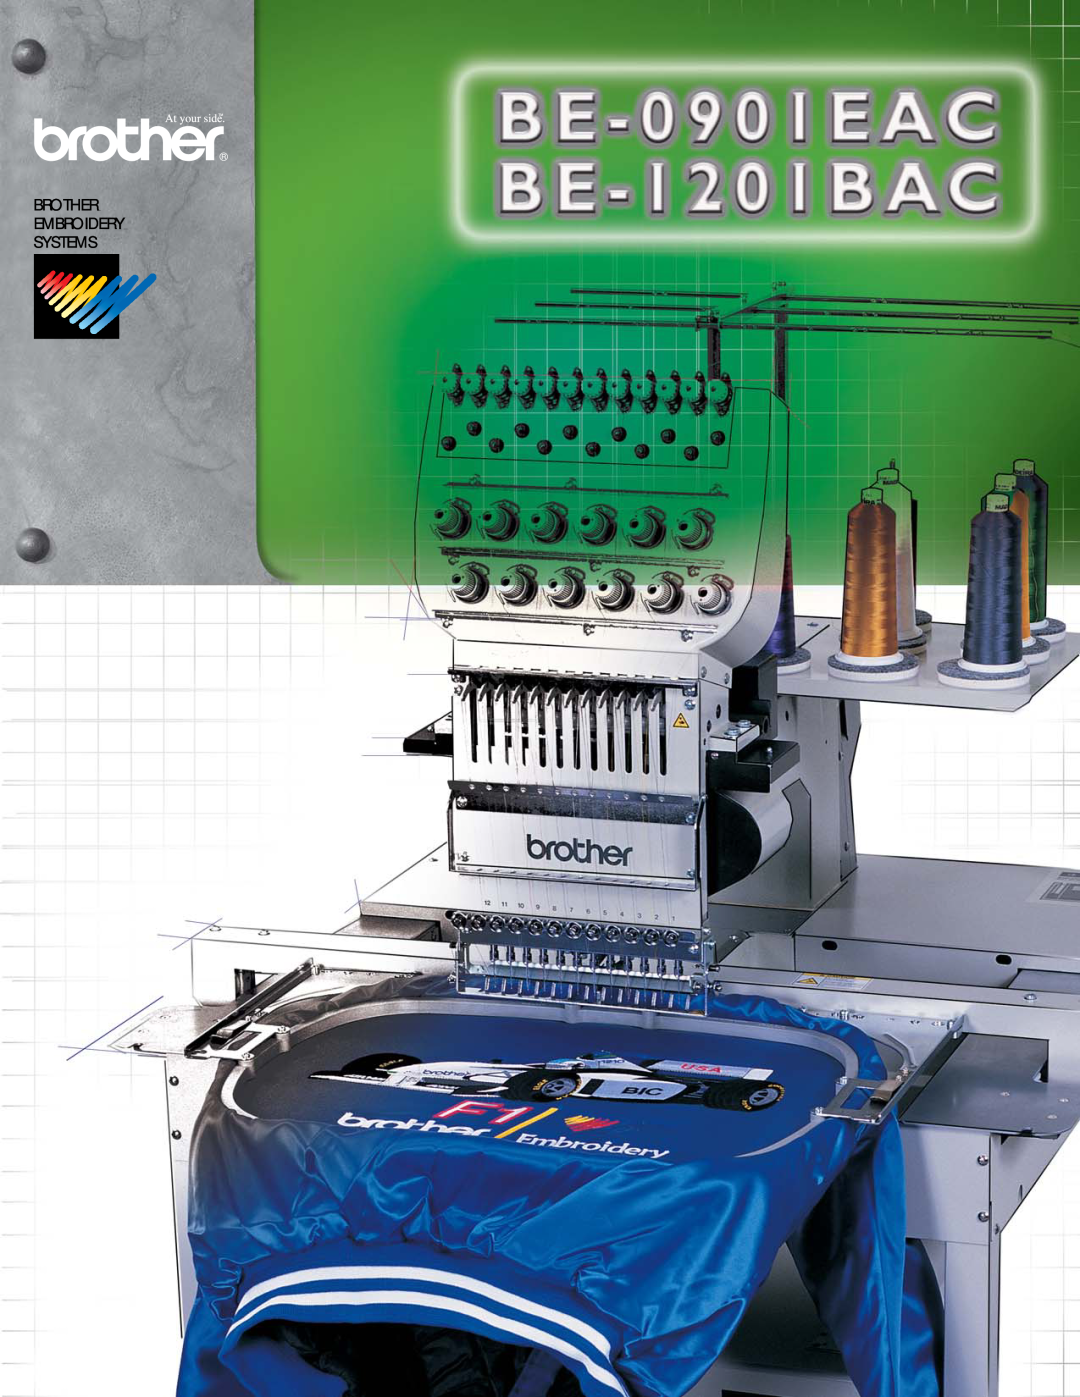 Brother BE-0901EAC, BE-1201BAC manual Brother Embroidery Systems 